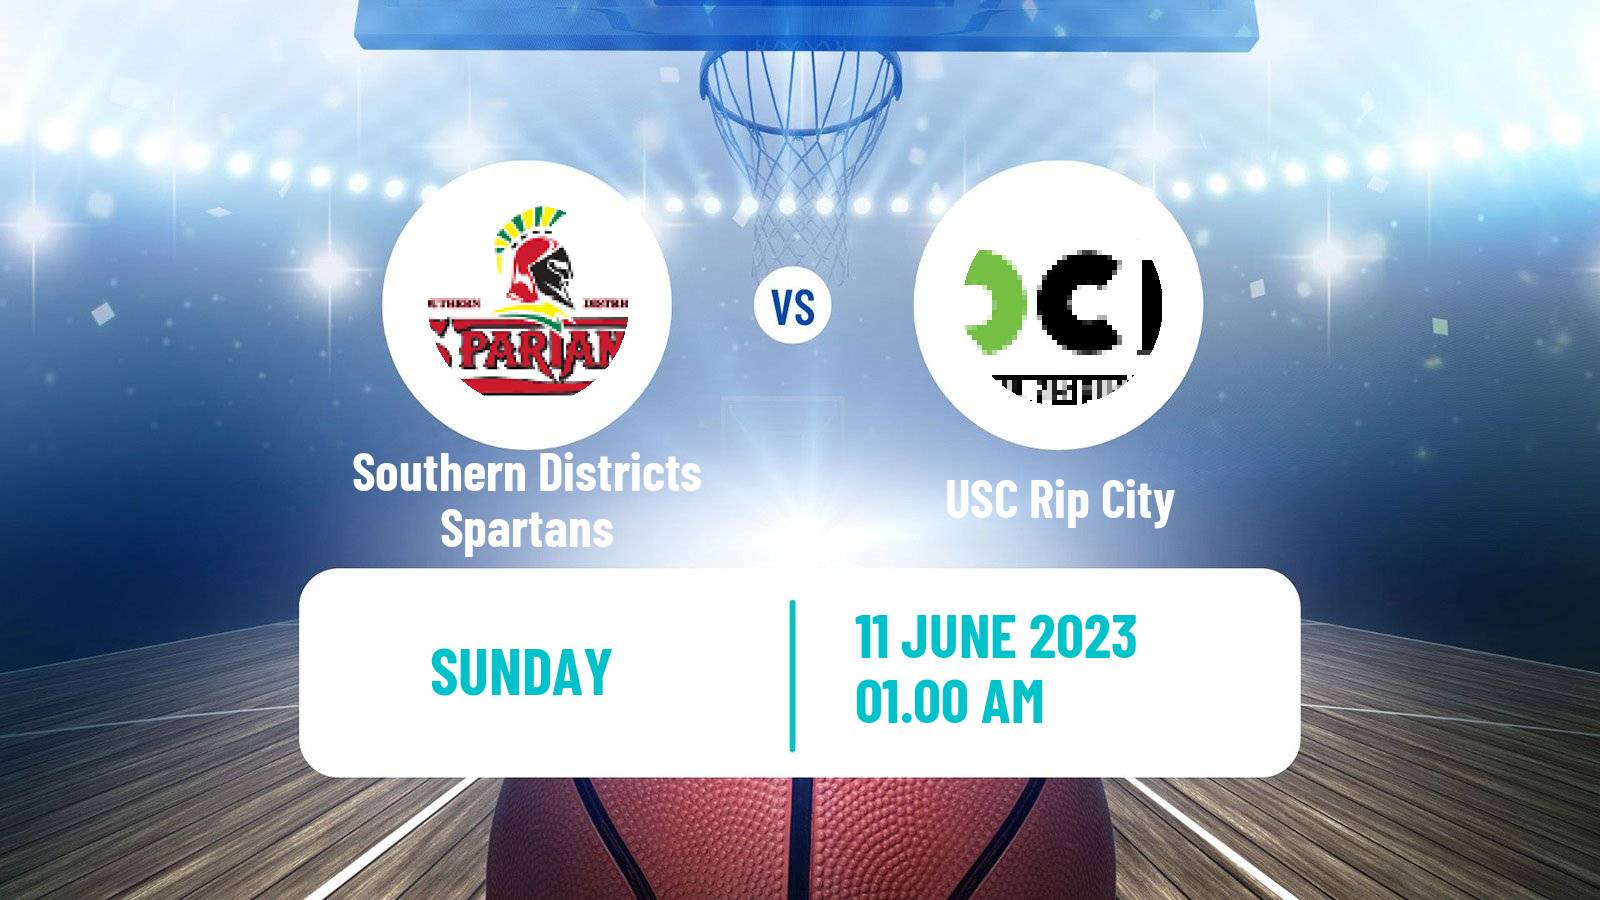 Basketball Australian NBL1 North Southern Districts Spartans - USC Rip City